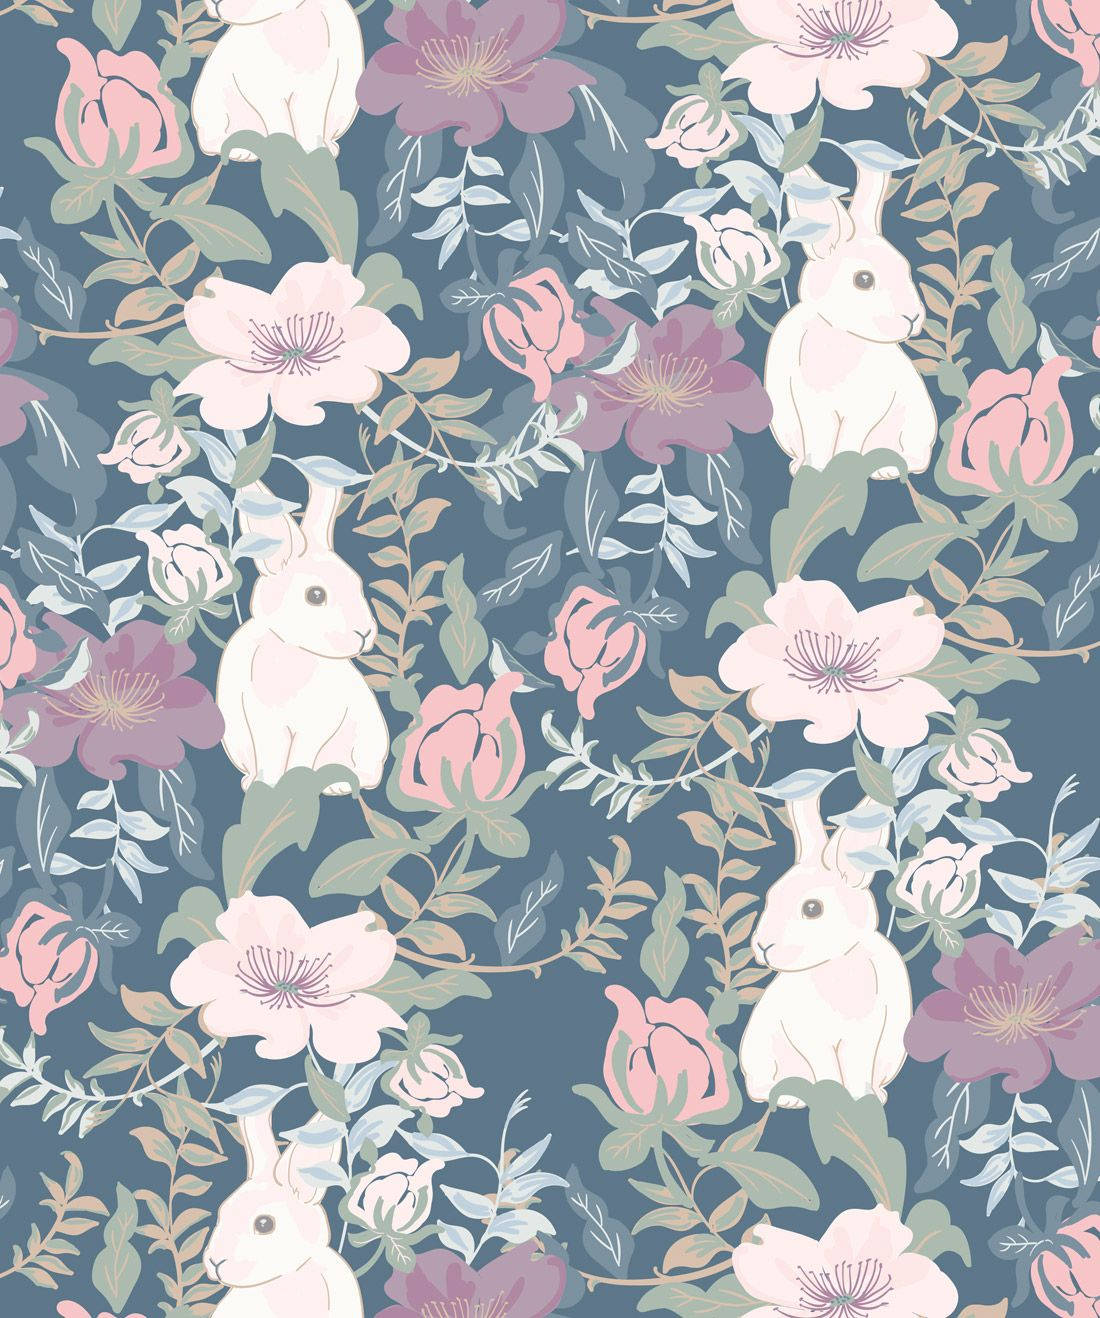 Cute Bunny On Floral Design Background